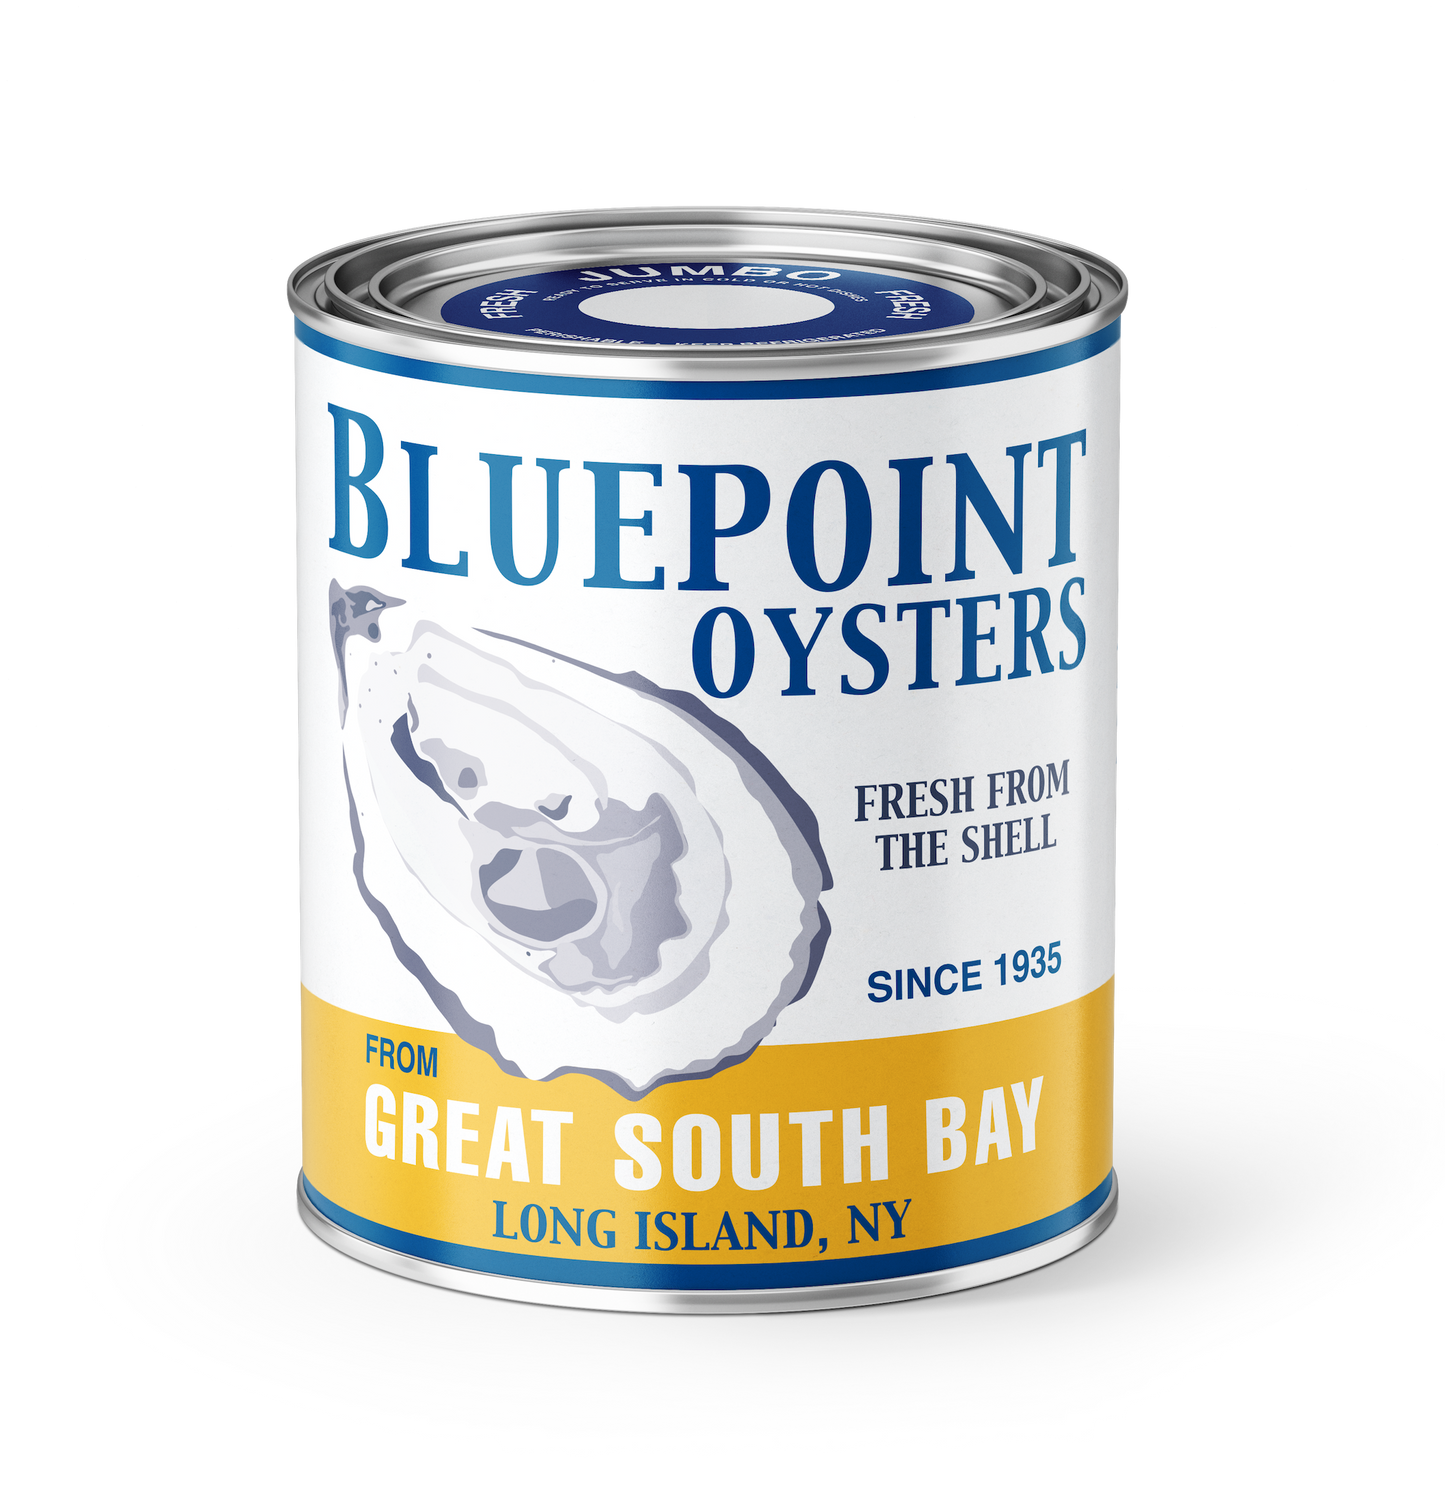 Vintage Blue Point Oyster Candle